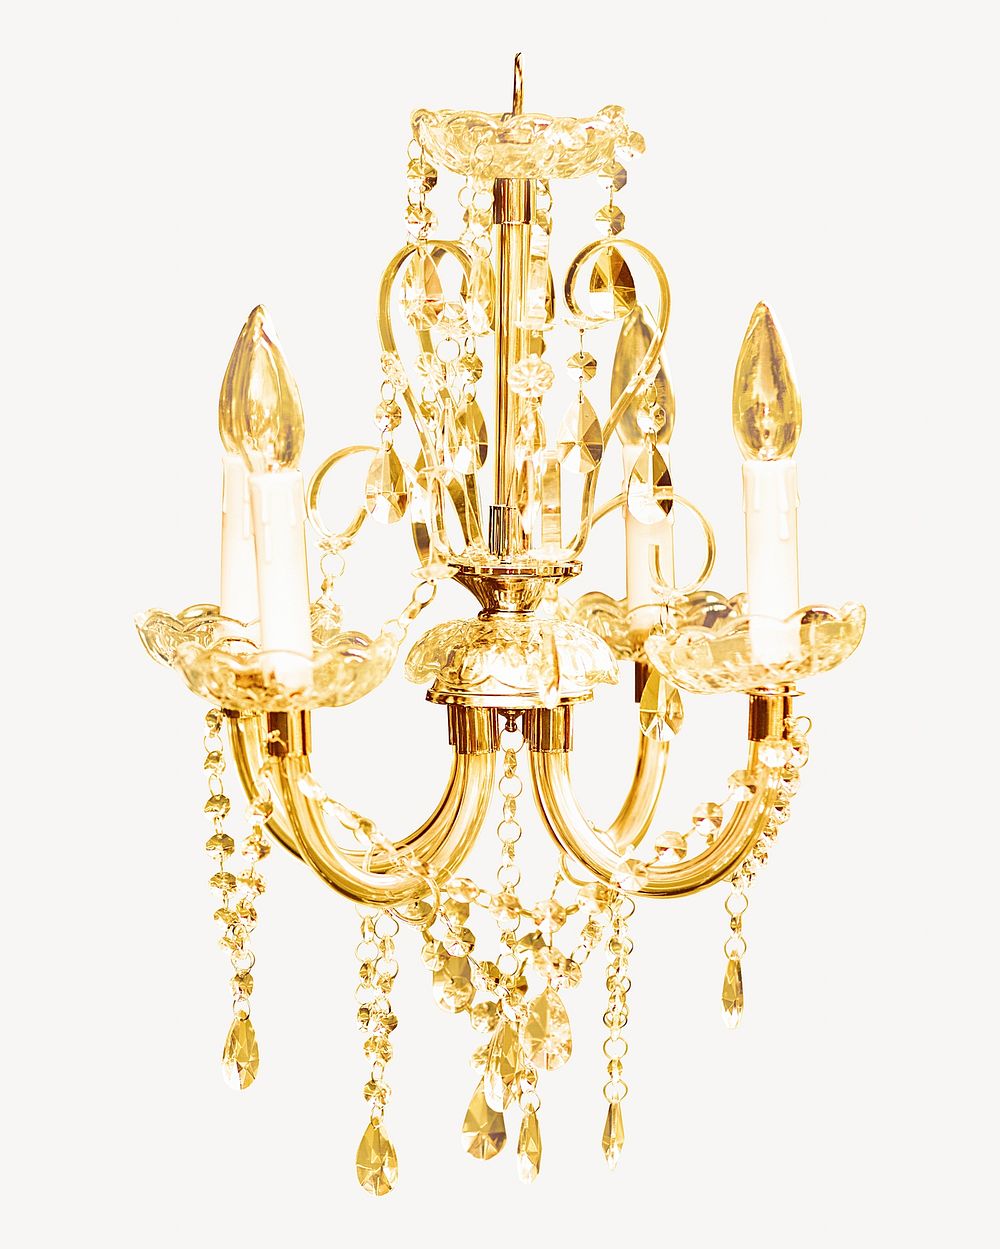 Chandelier isolated image on white